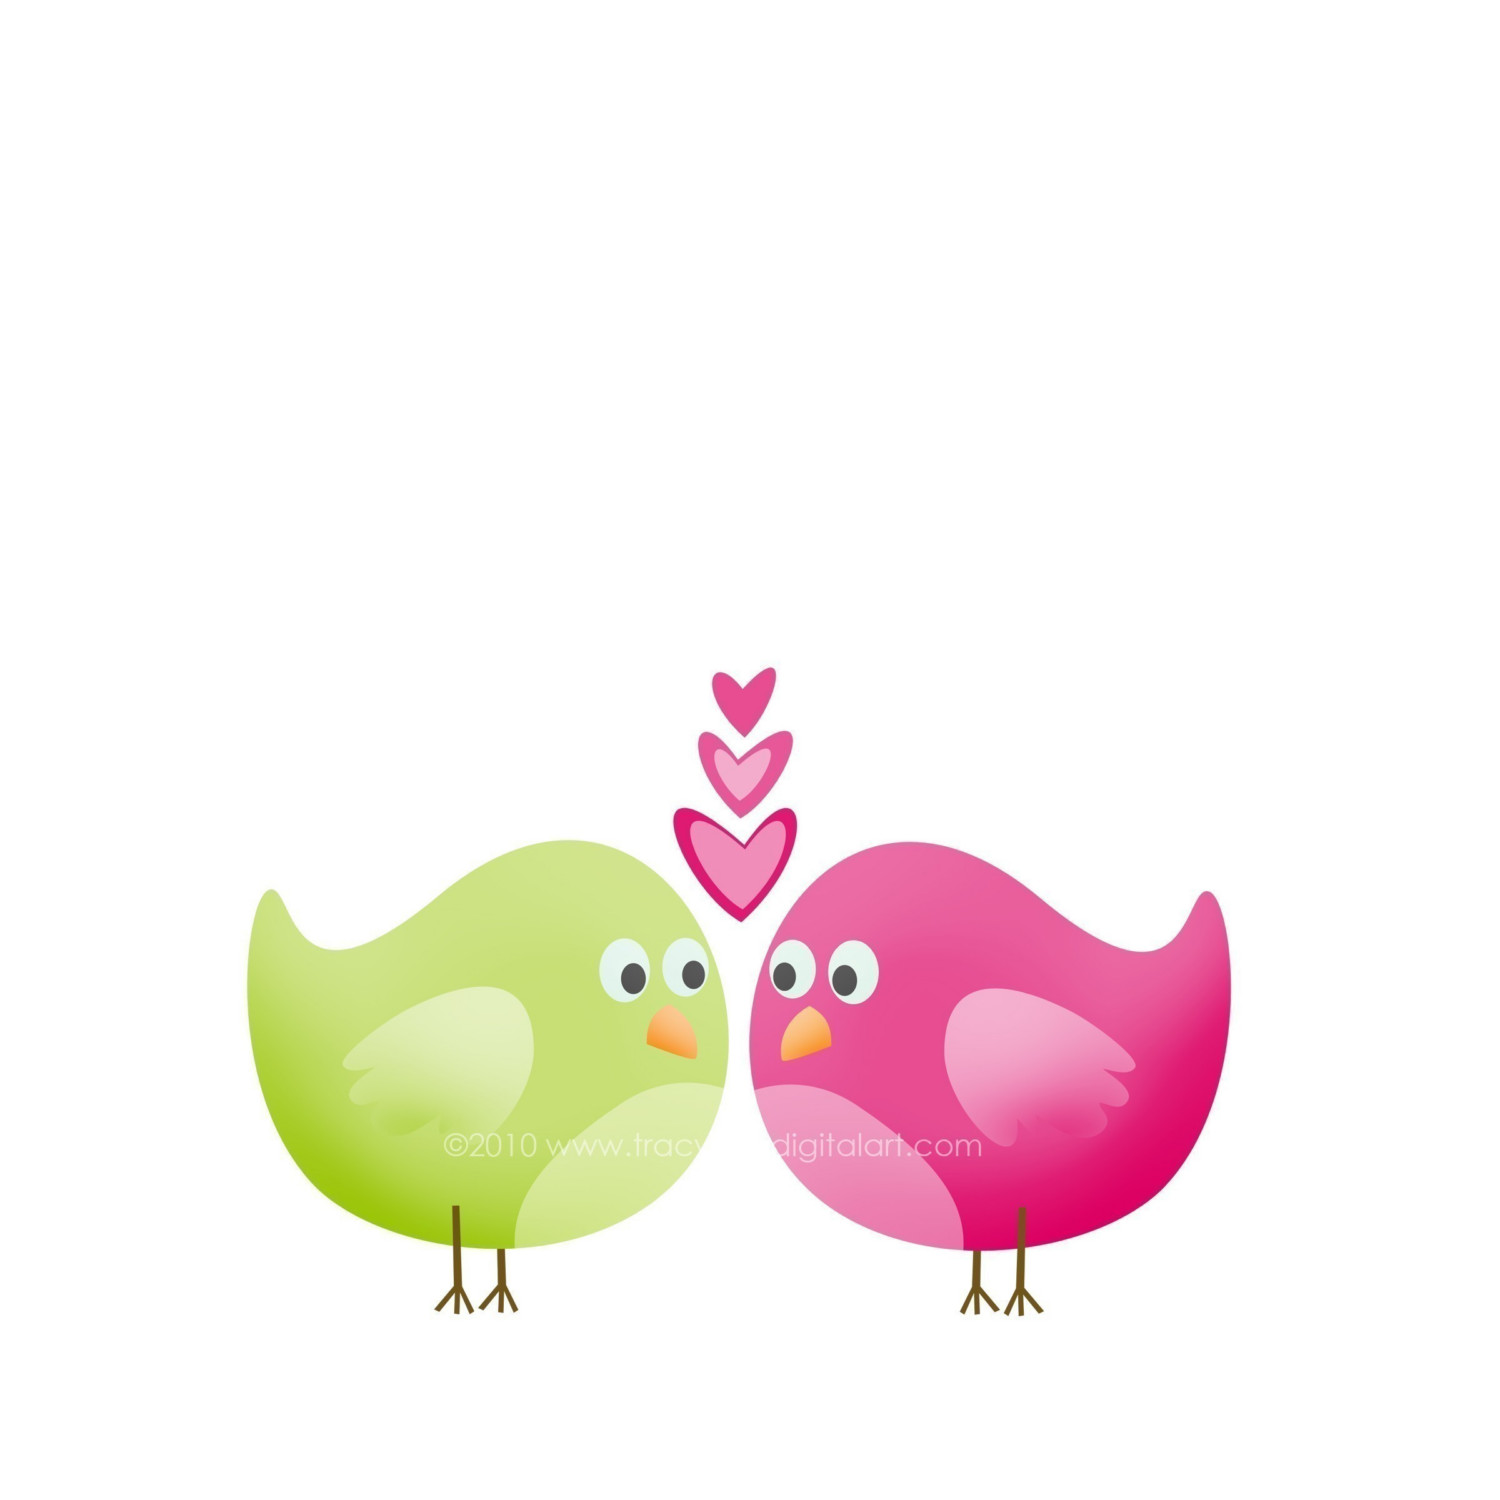 Lovebird clipart #6, Download drawings